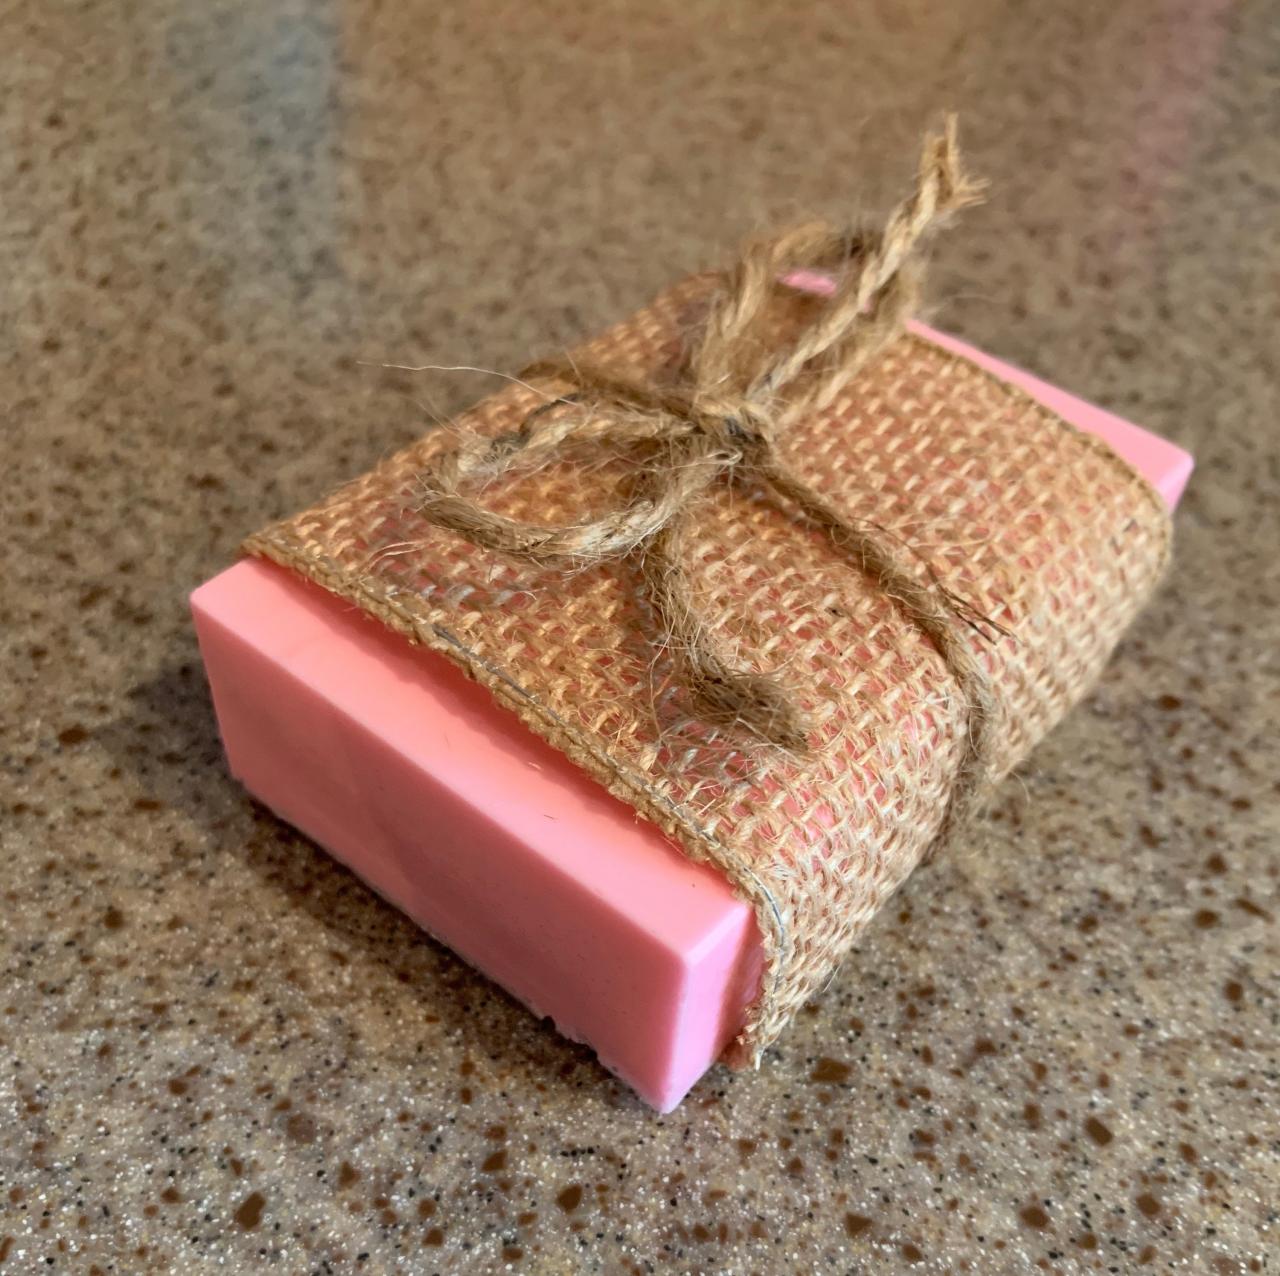 Natural Handmade Vegan Soap, Cherry Blossom Organic Soap Bars-scented soap-Japan-pink soap-wedding favors-spa items-gifts for her-sensitive skin care-rustic